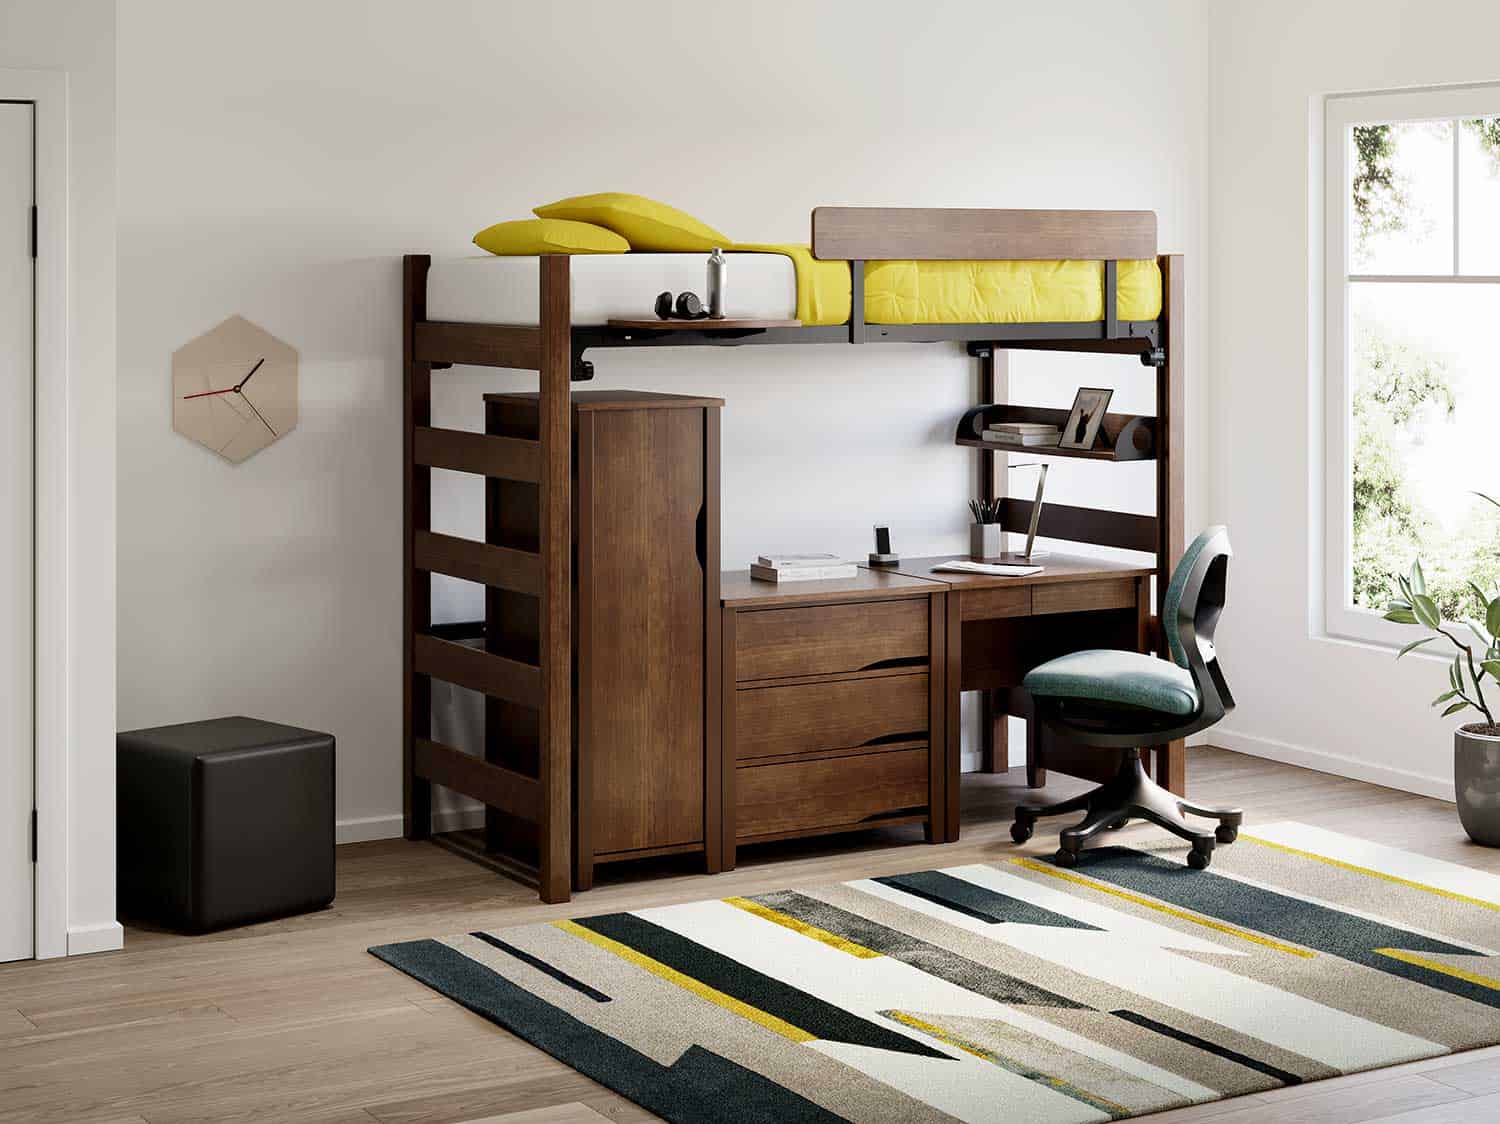 Student Room with Endure 18 inch Wardrobe, 3-Drawer Chest and Writing Desk, Trey Chair, Square Kirby Stool and zTrak Bed System.